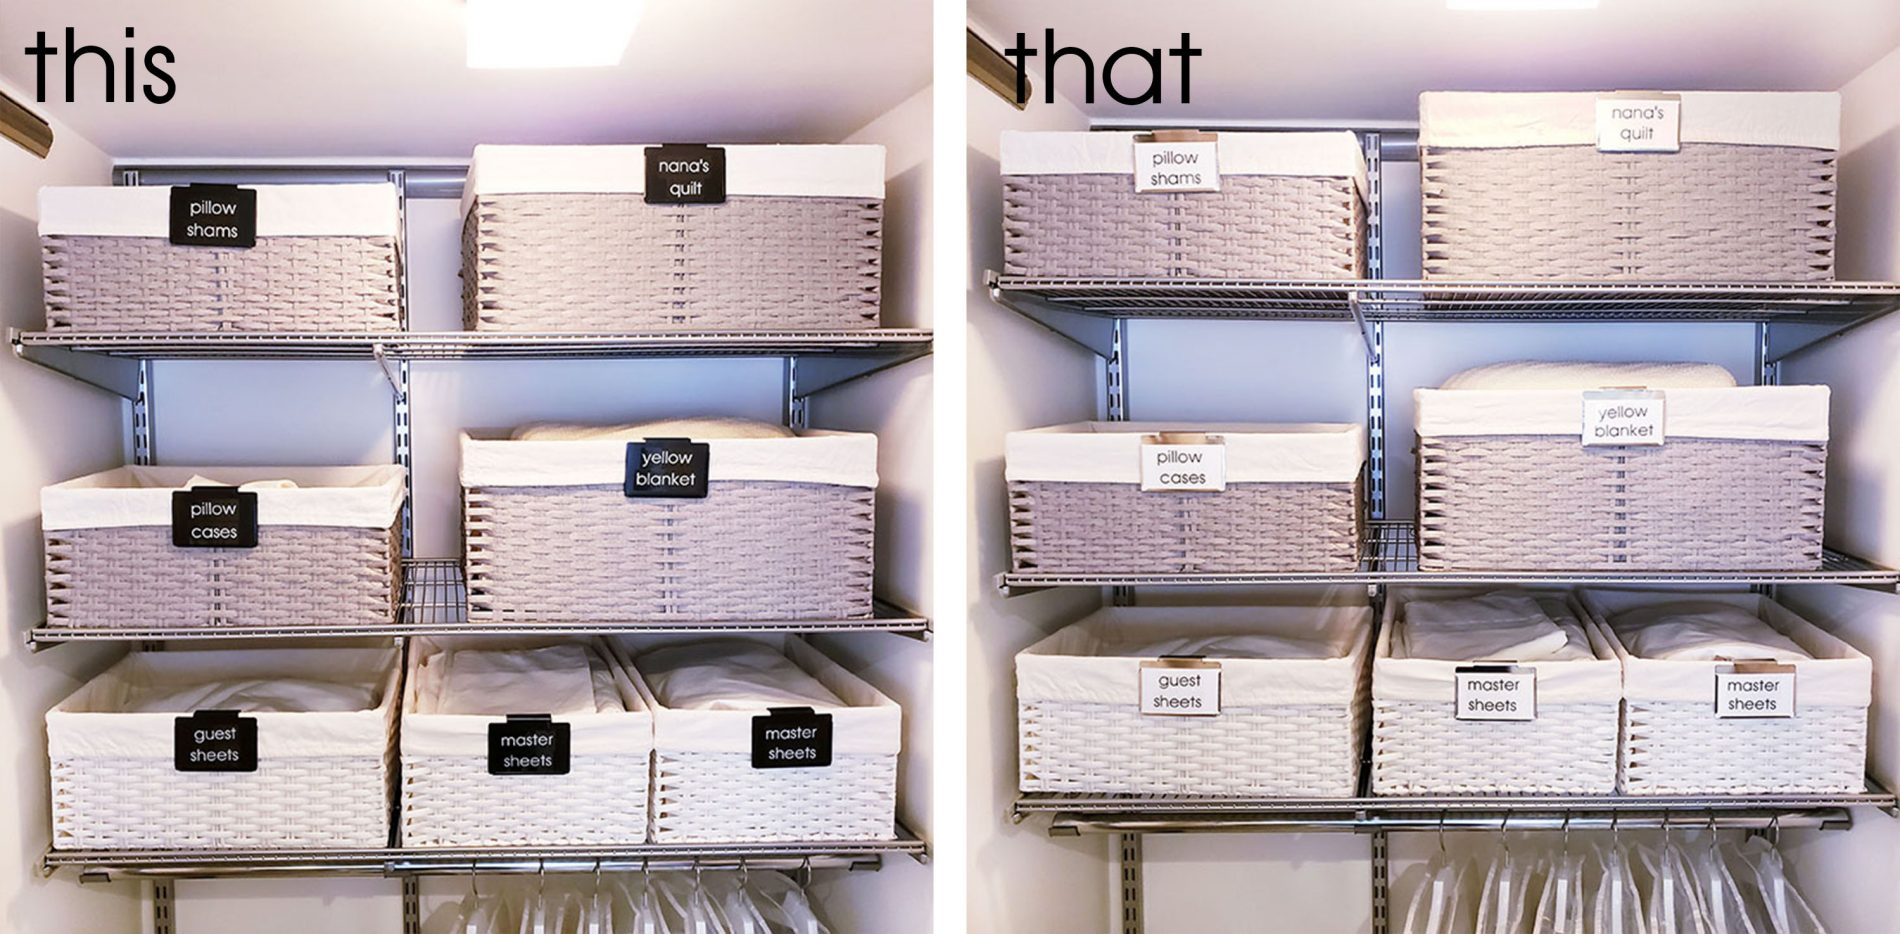 Two pictures of a linen closet with baskets on the shelves, helping to organize your space.